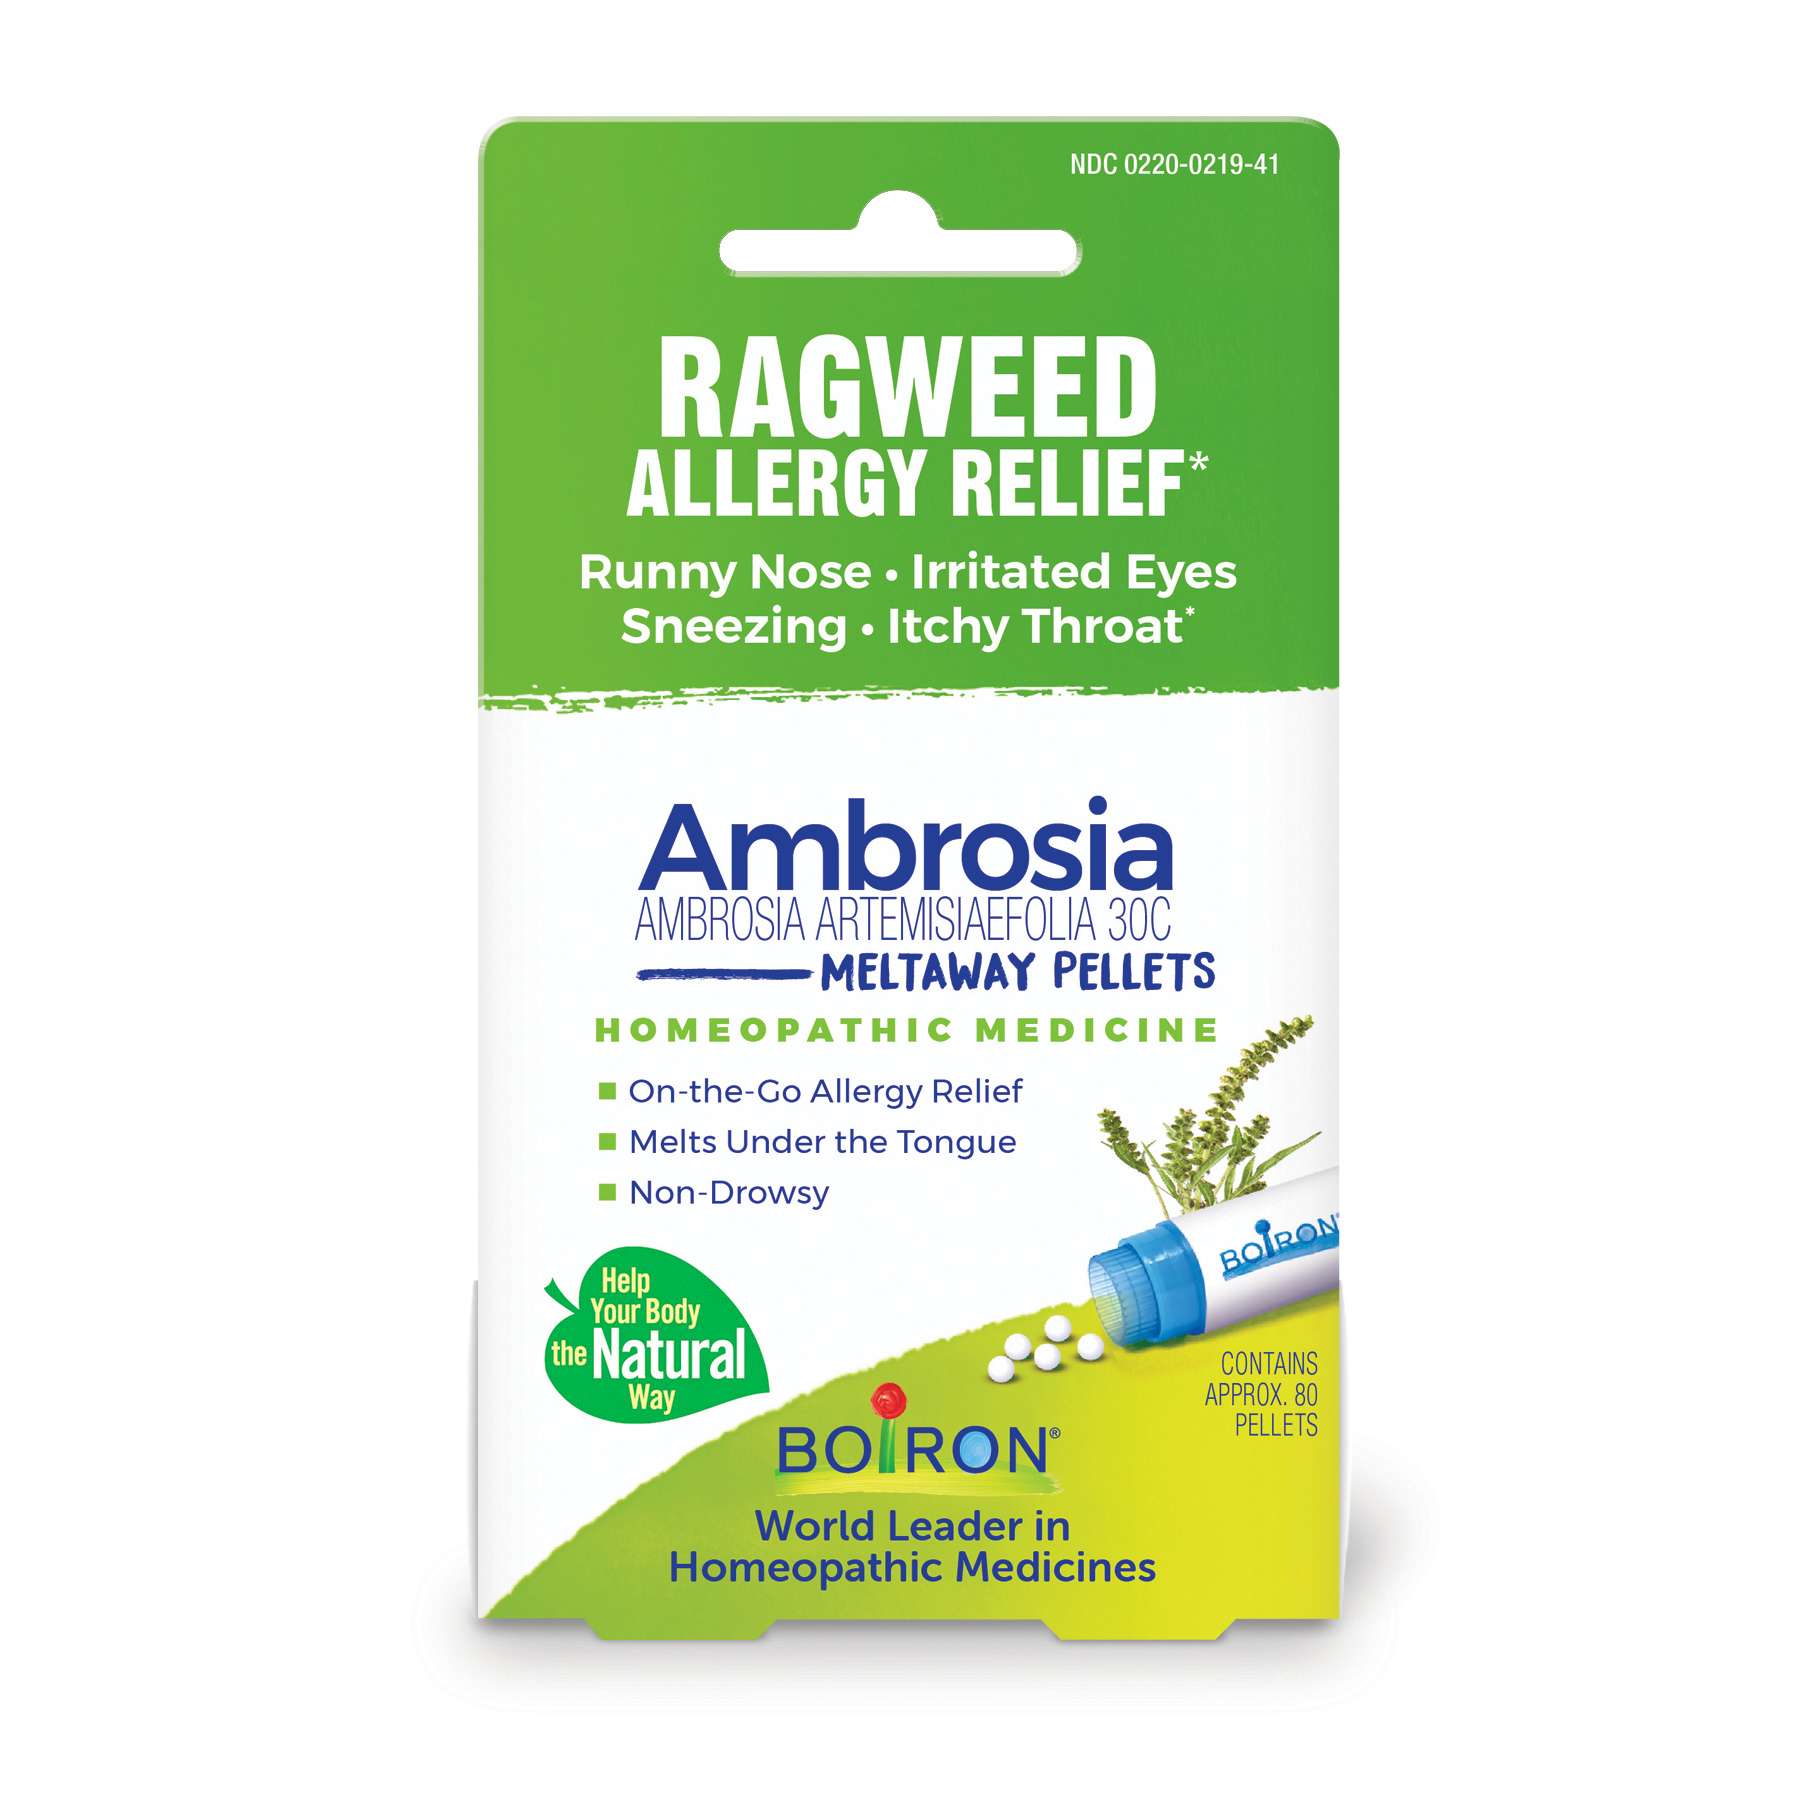 Ragweed Allergy Relief®